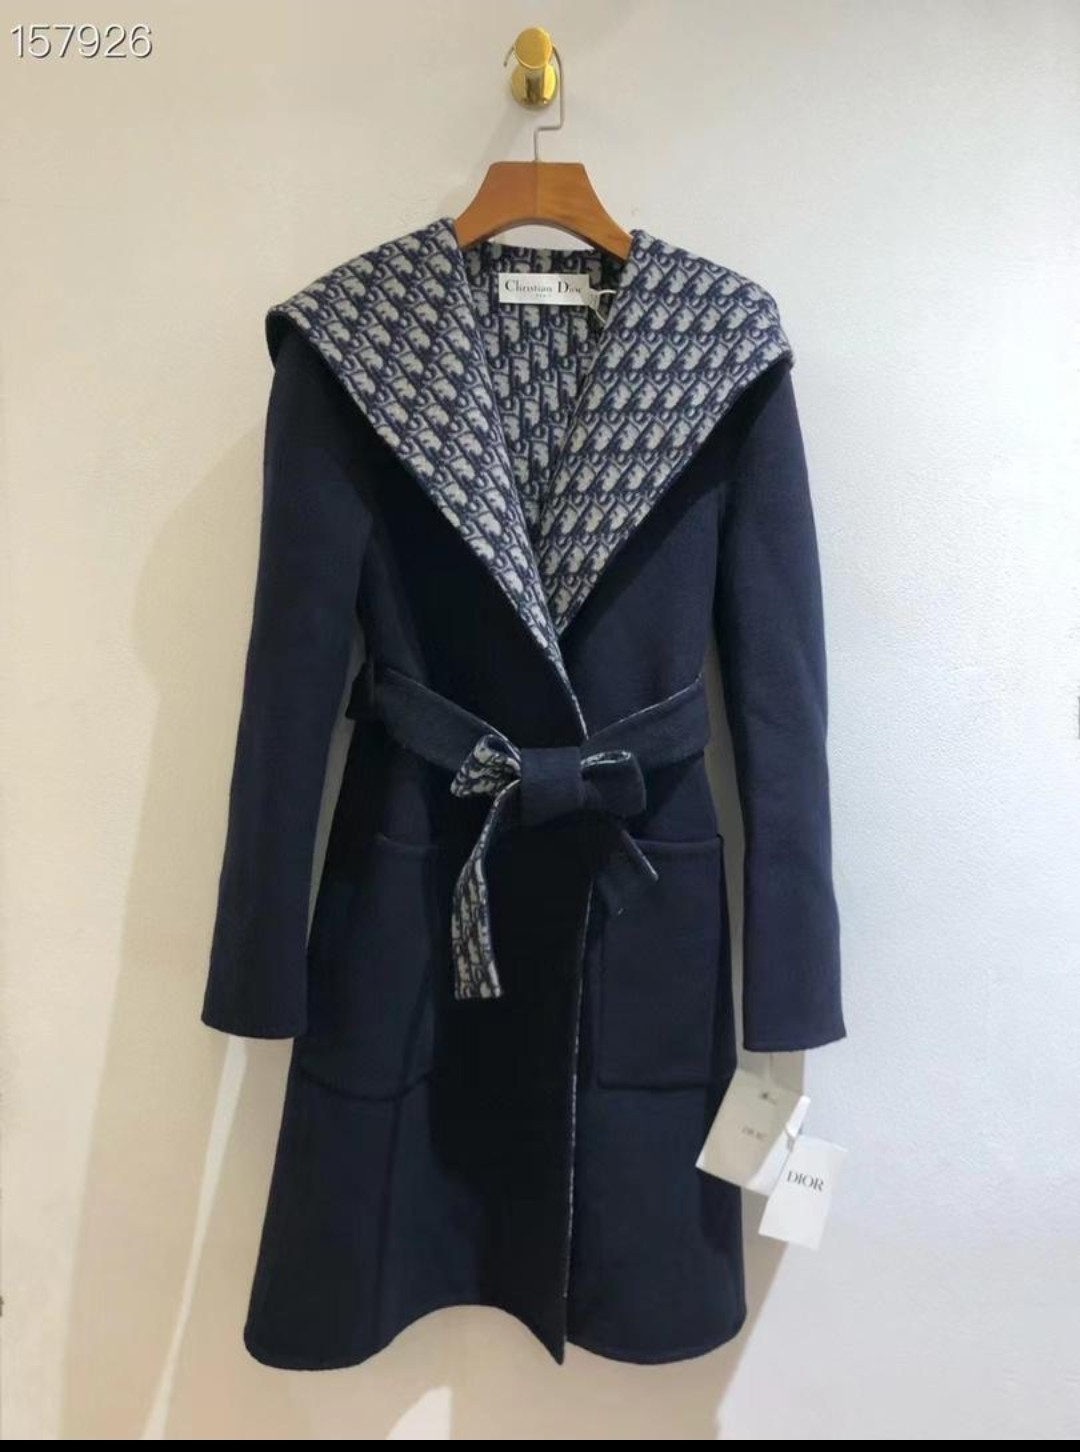 Belted Double Face Hooded Wrap Coat - Ready-to-Wear 1A99K3